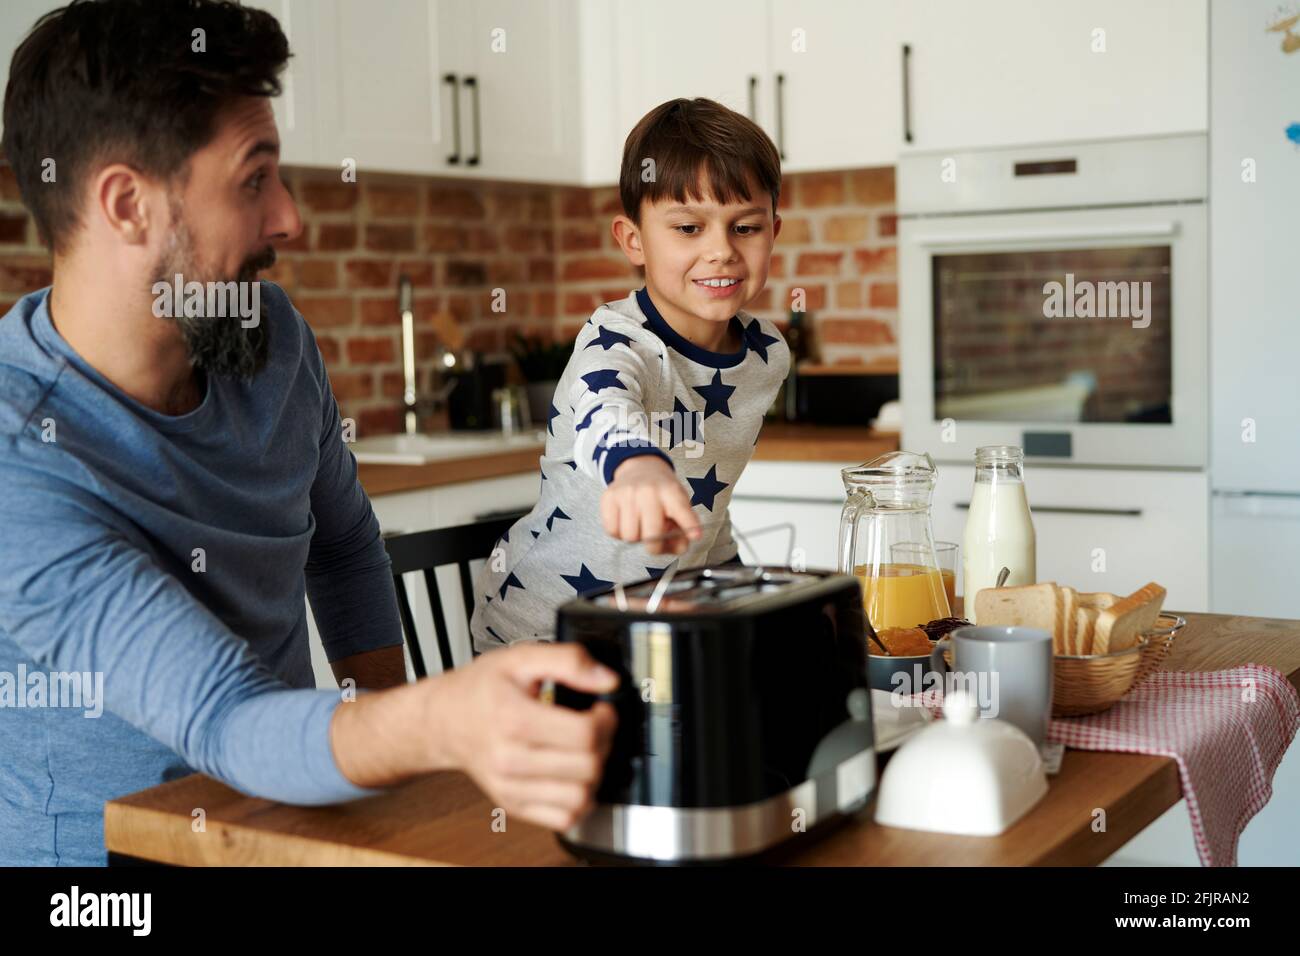 Smiling boy waiting for toasts from a toaster Stock Photo